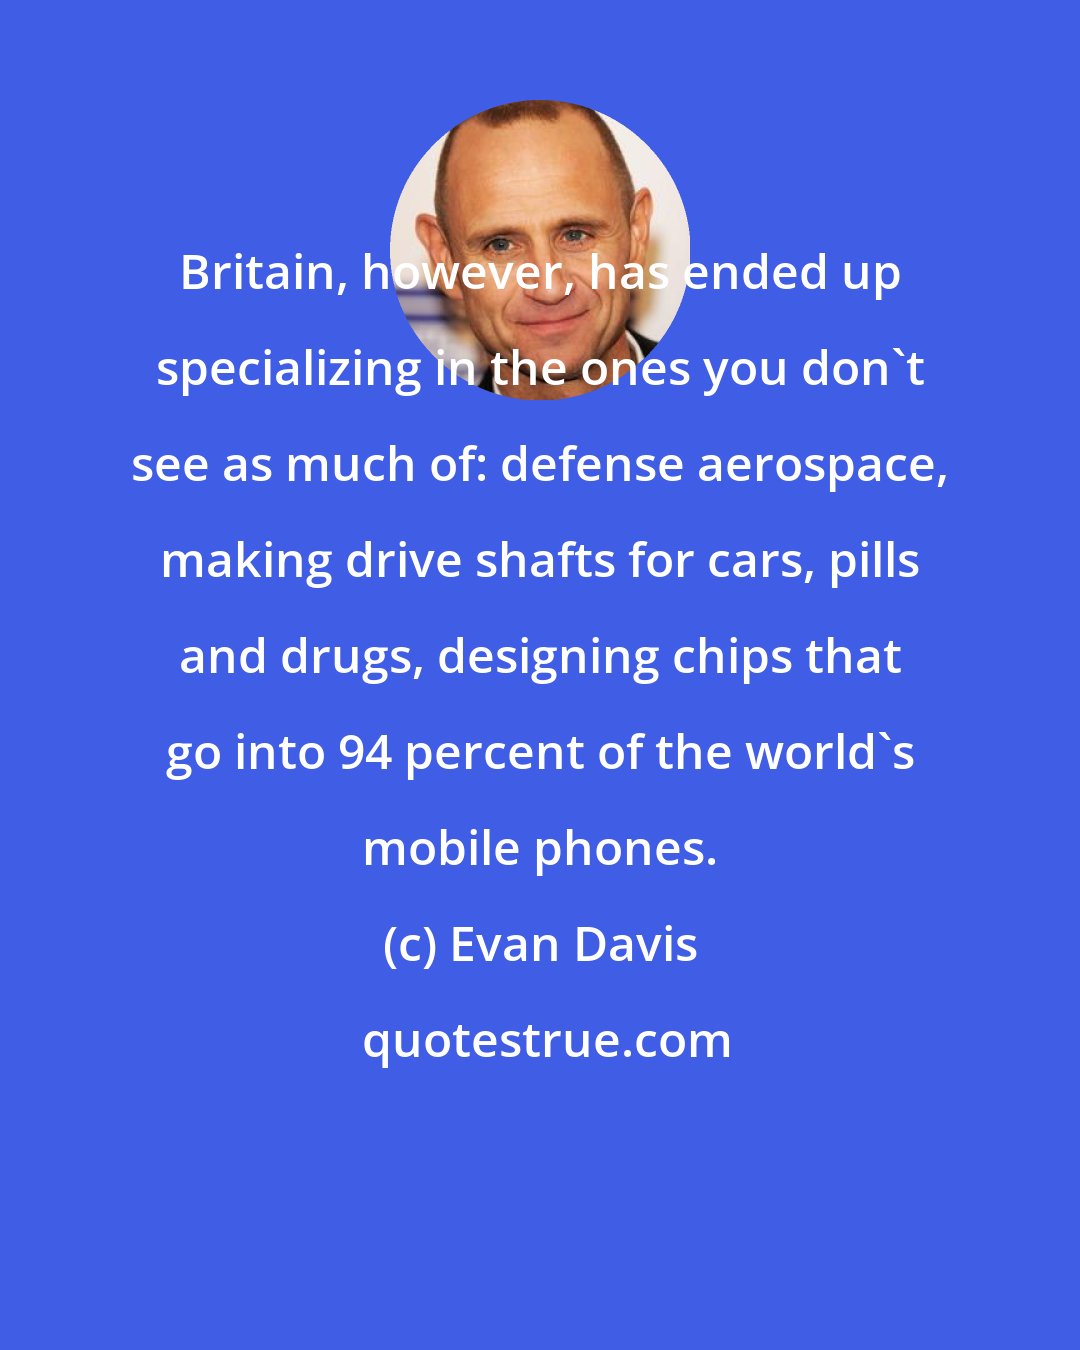 Evan Davis: Britain, however, has ended up specializing in the ones you don't see as much of: defense aerospace, making drive shafts for cars, pills and drugs, designing chips that go into 94 percent of the world's mobile phones.